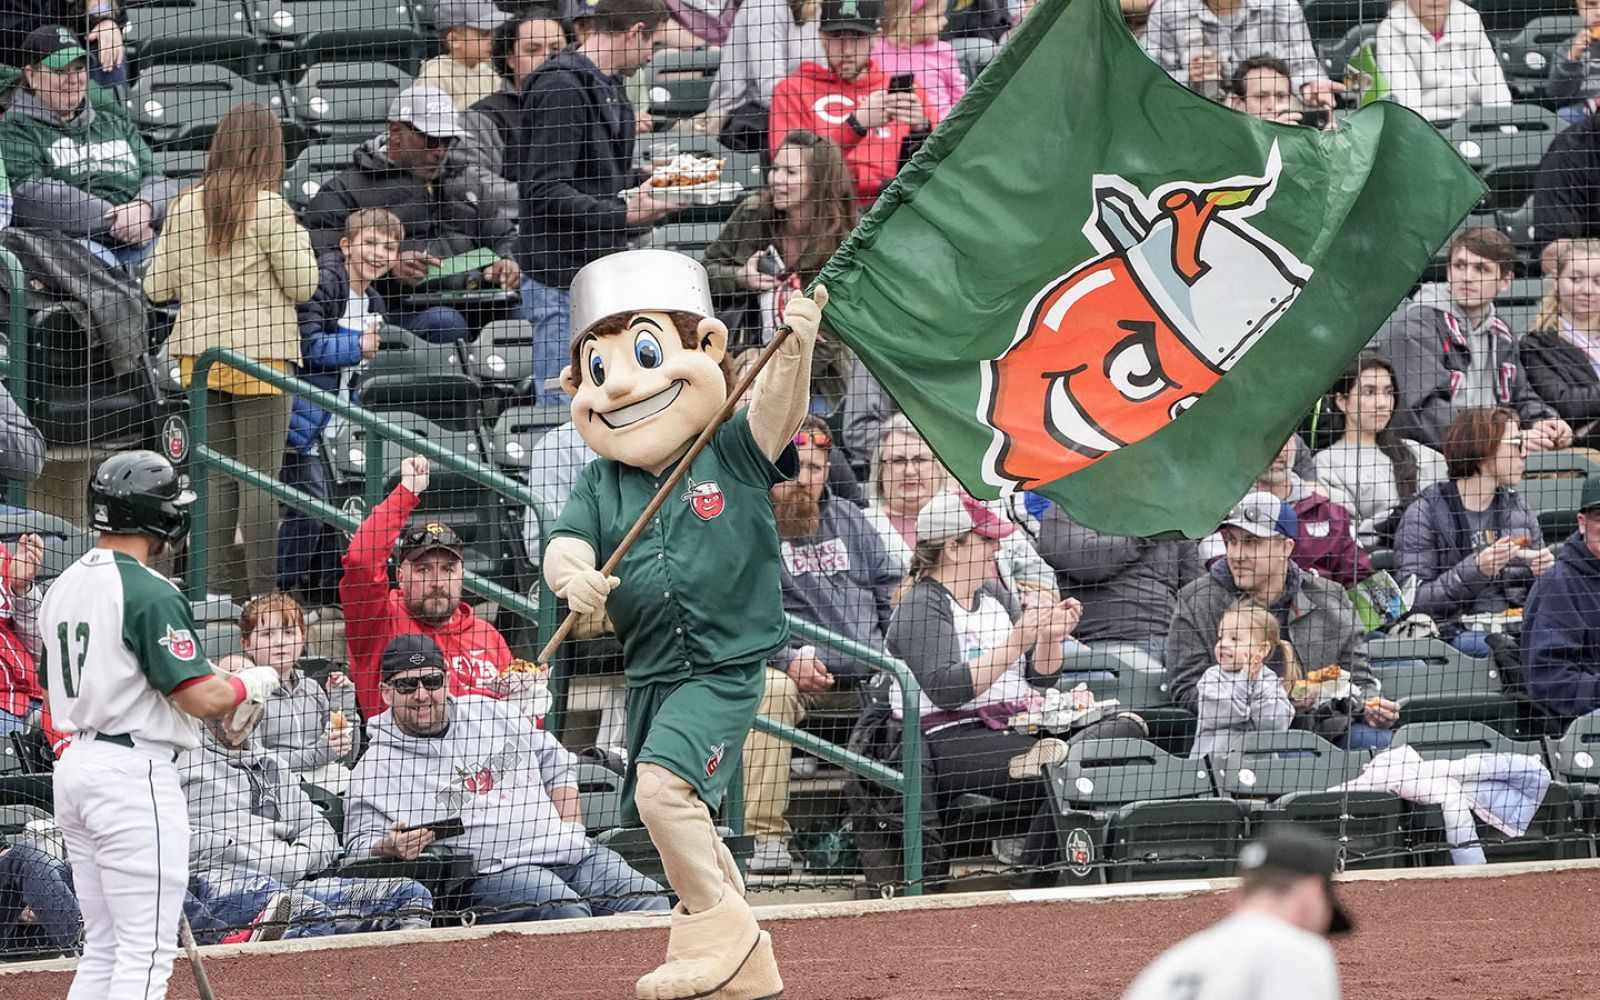 The Fort Wayne TinCaps kick off their 2024 home campaign on Tuesday, April 9. With 66 games on the schedule, you’re sure to find a reason to make it out to the ballpark this season.